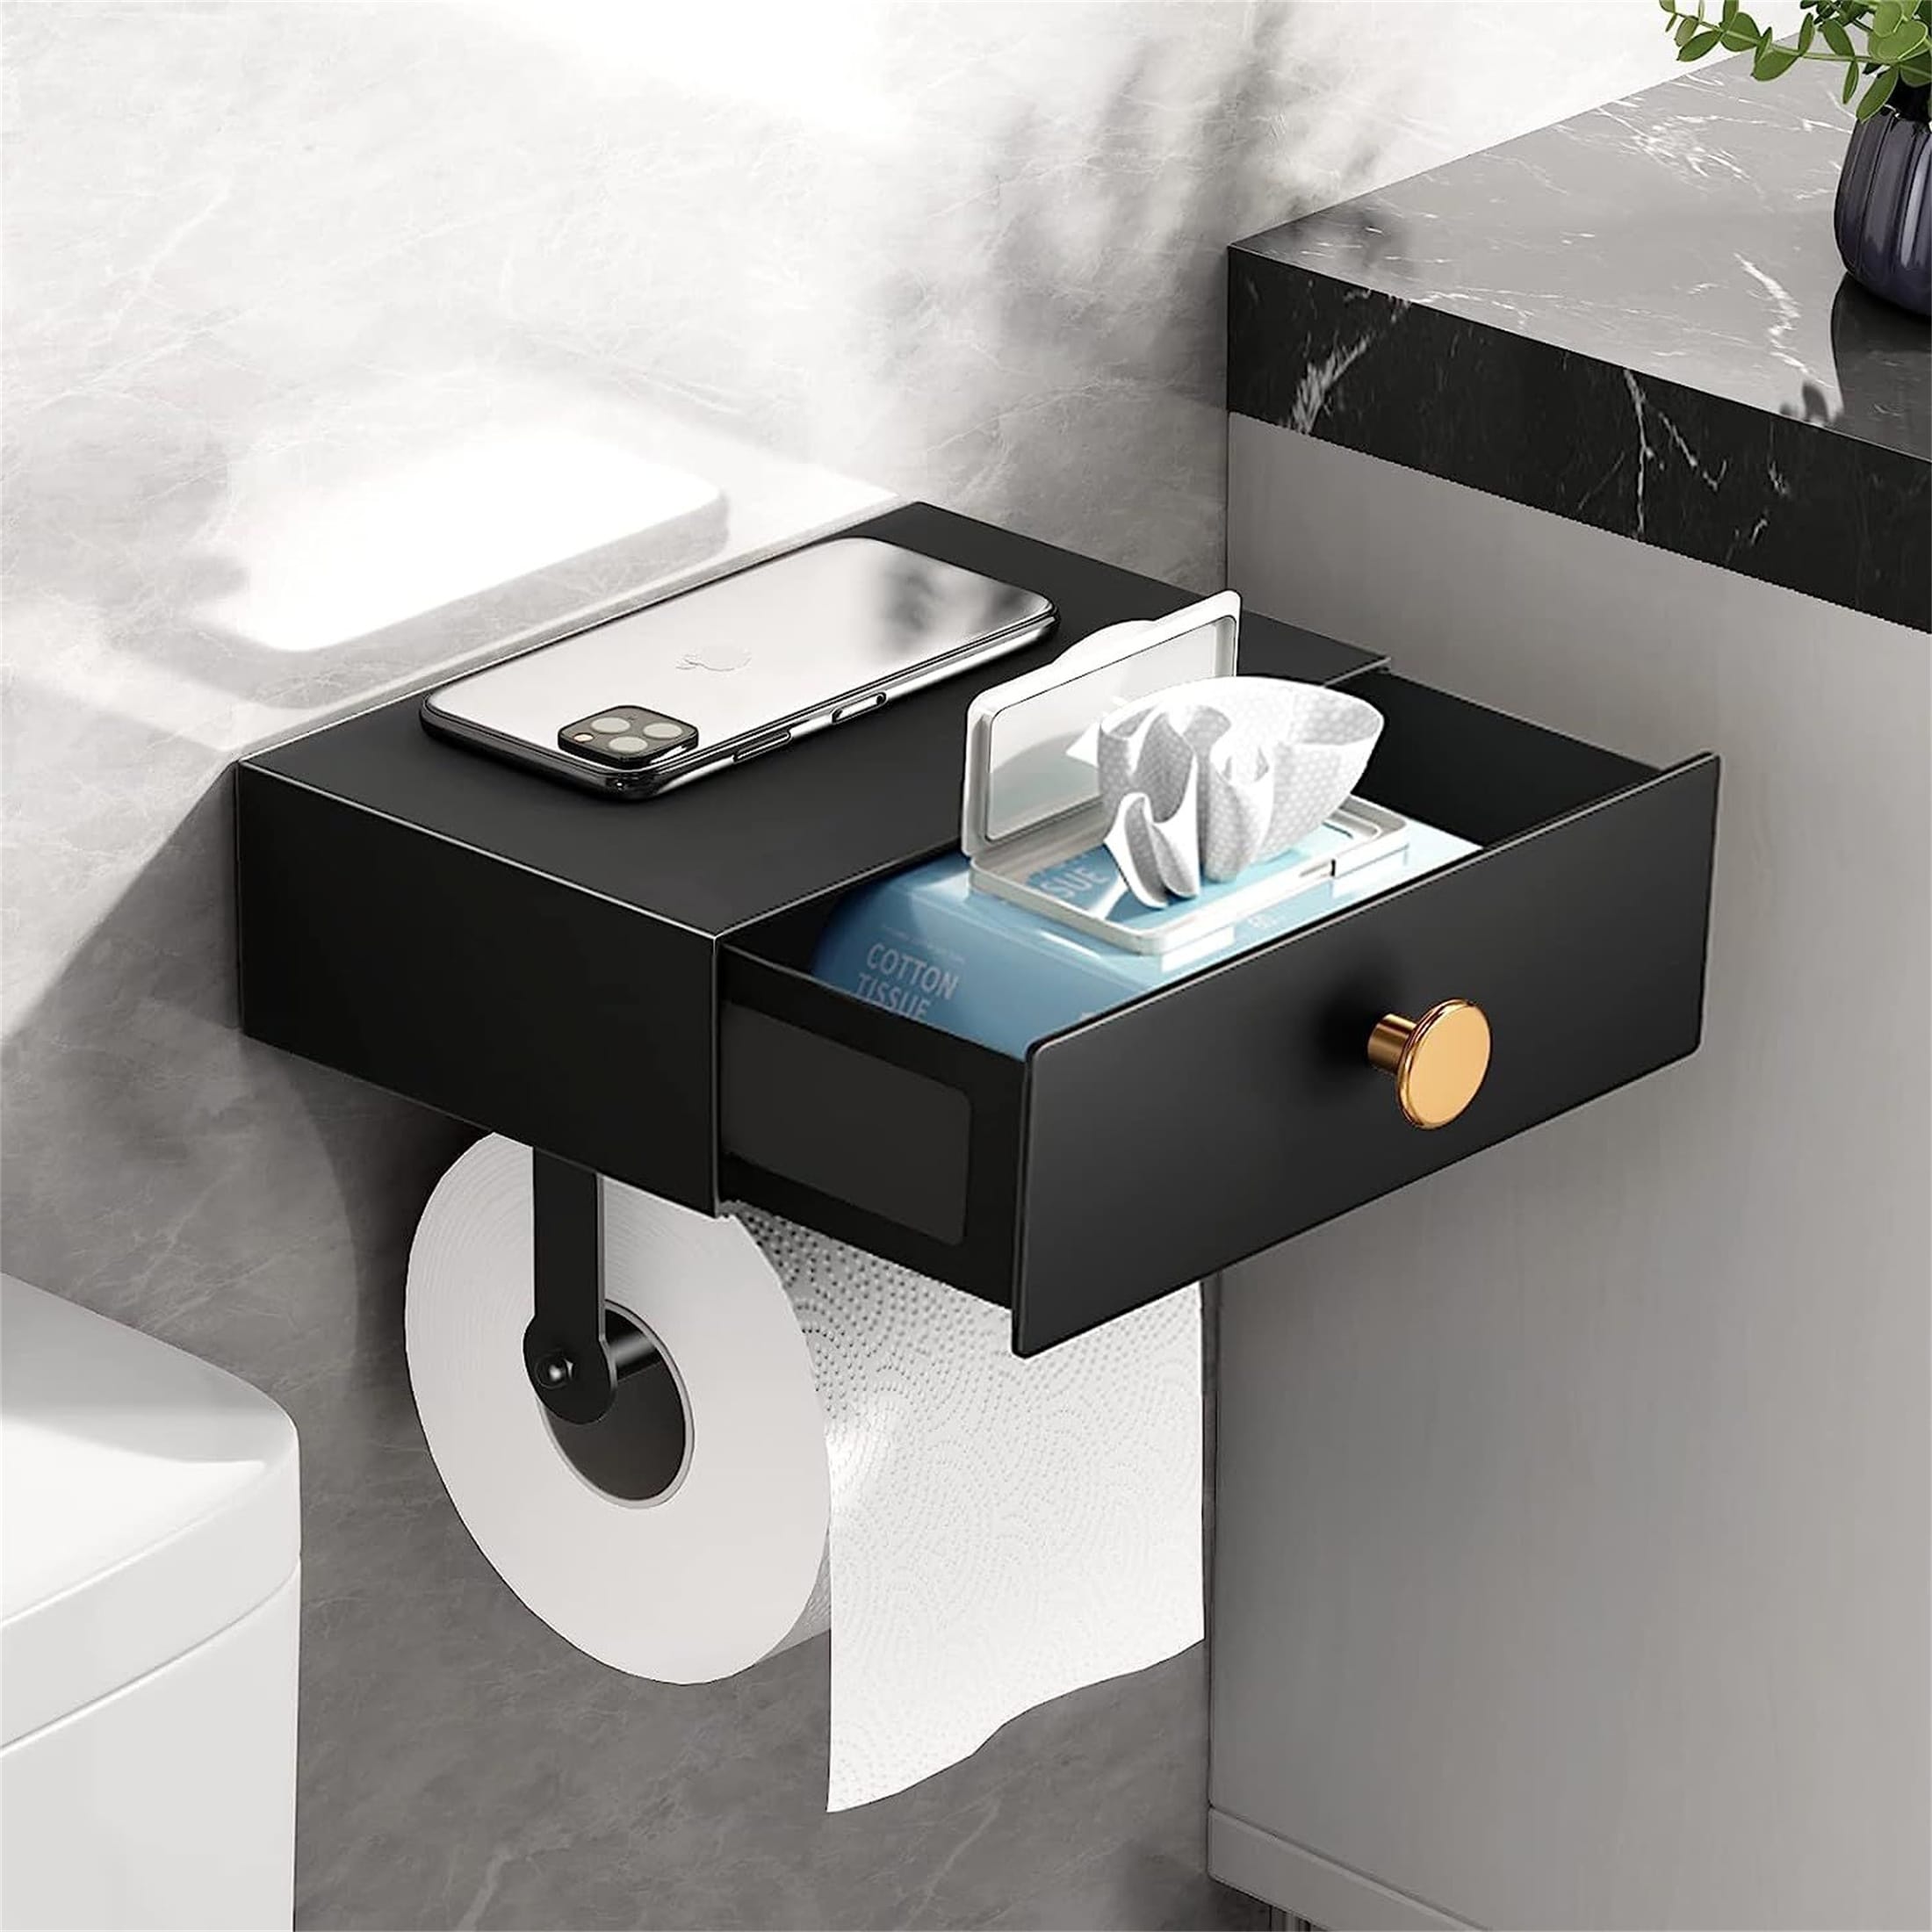 https://ak1.ostkcdn.com/images/products/is/images/direct/1e61ea9c1c1ad0fcf2ce539253ff25b972a2e24d/Toilet-Paper-Holder-with-Shelf.jpg